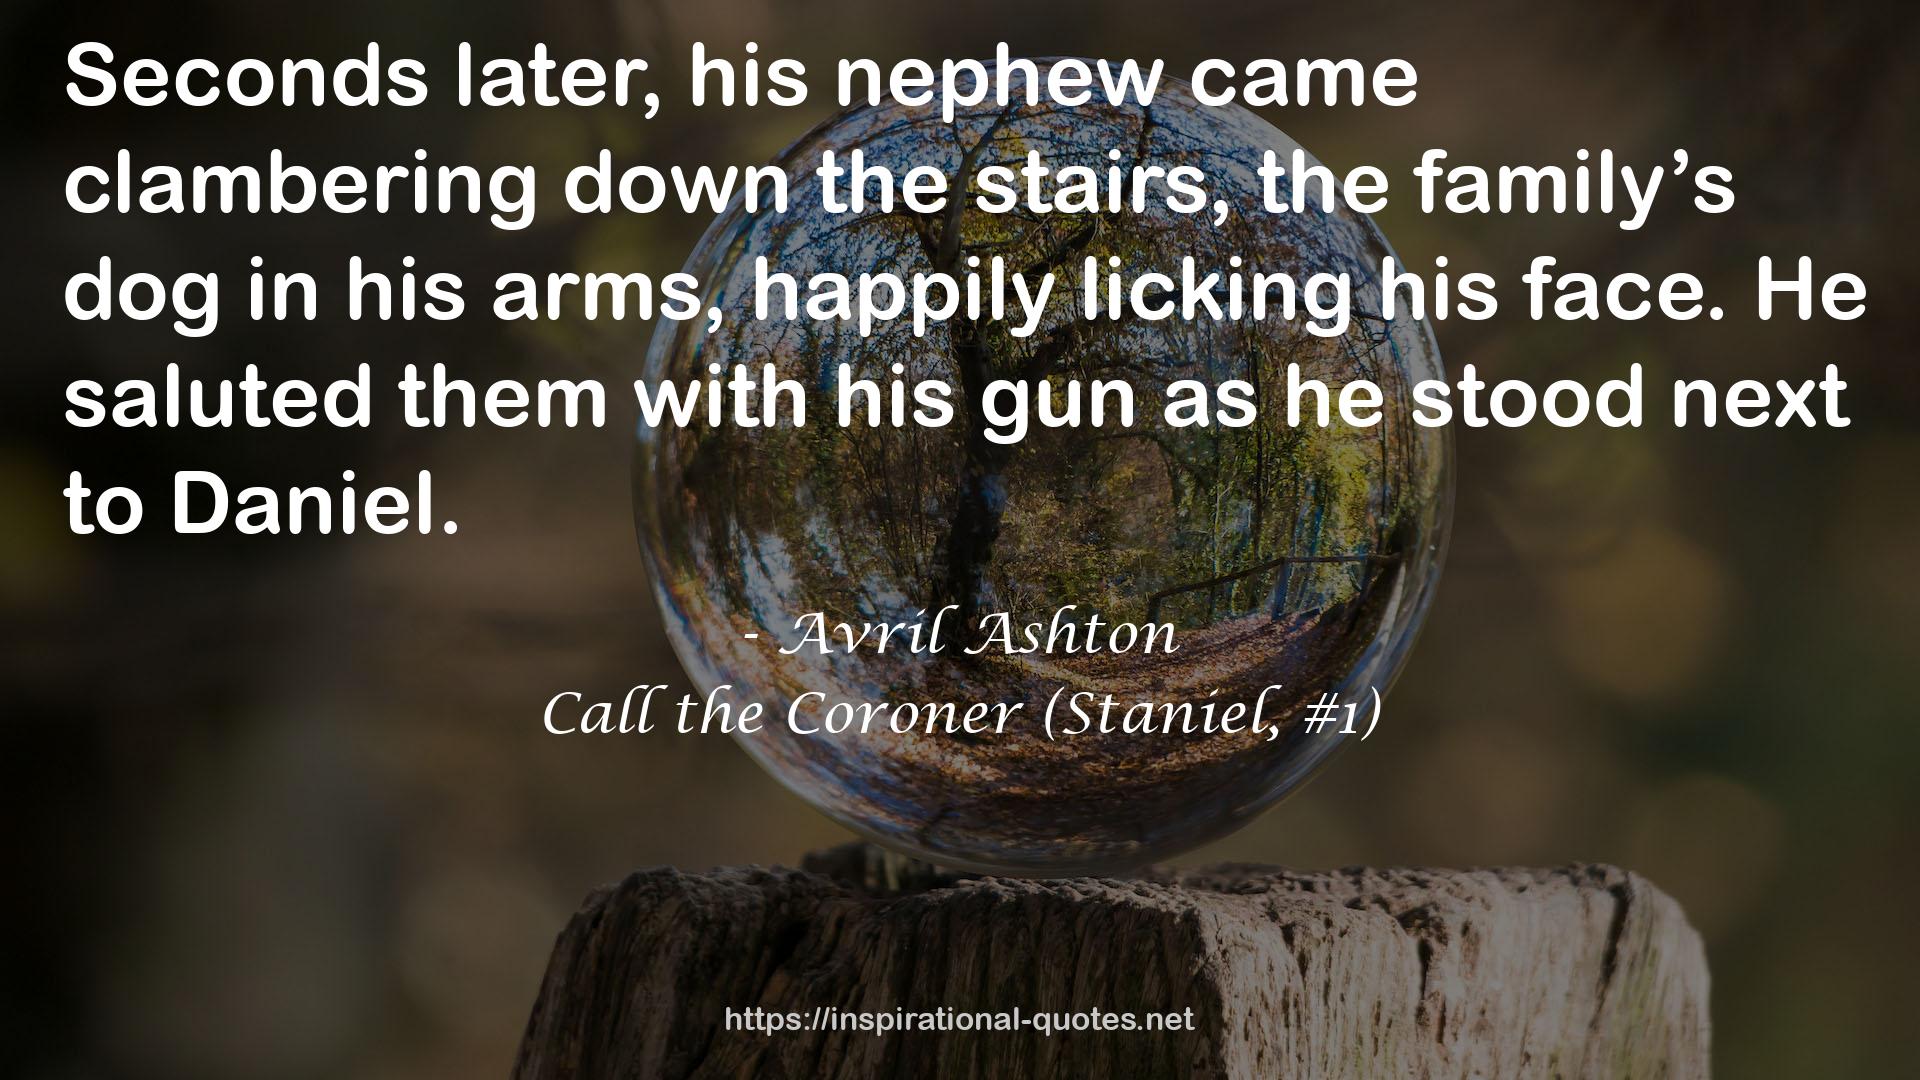 Call the Coroner (Staniel, #1) QUOTES